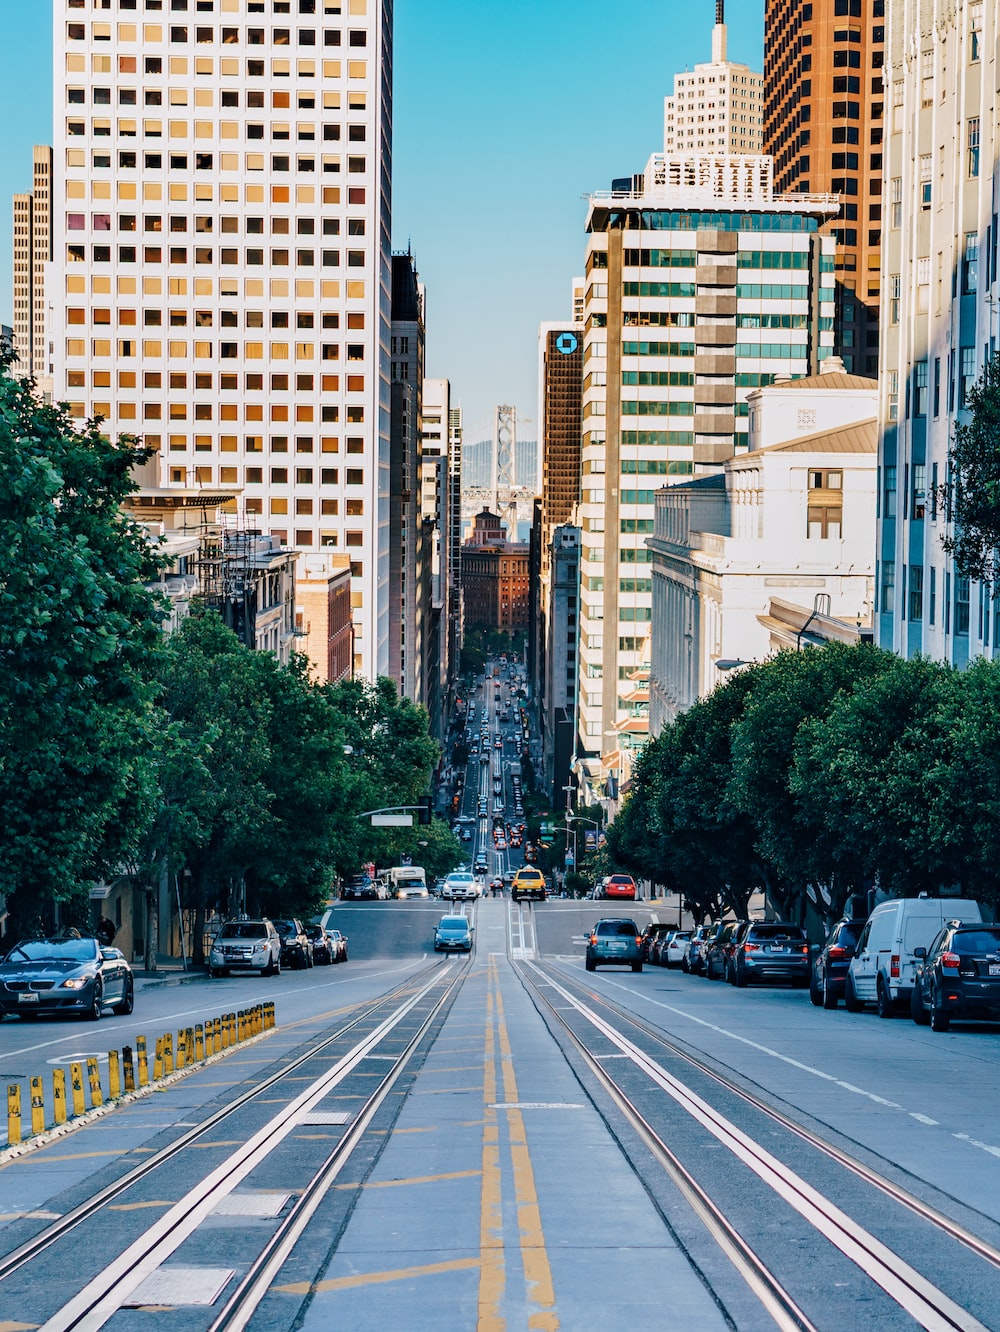 San Francisco Street Picture. Download Free Image